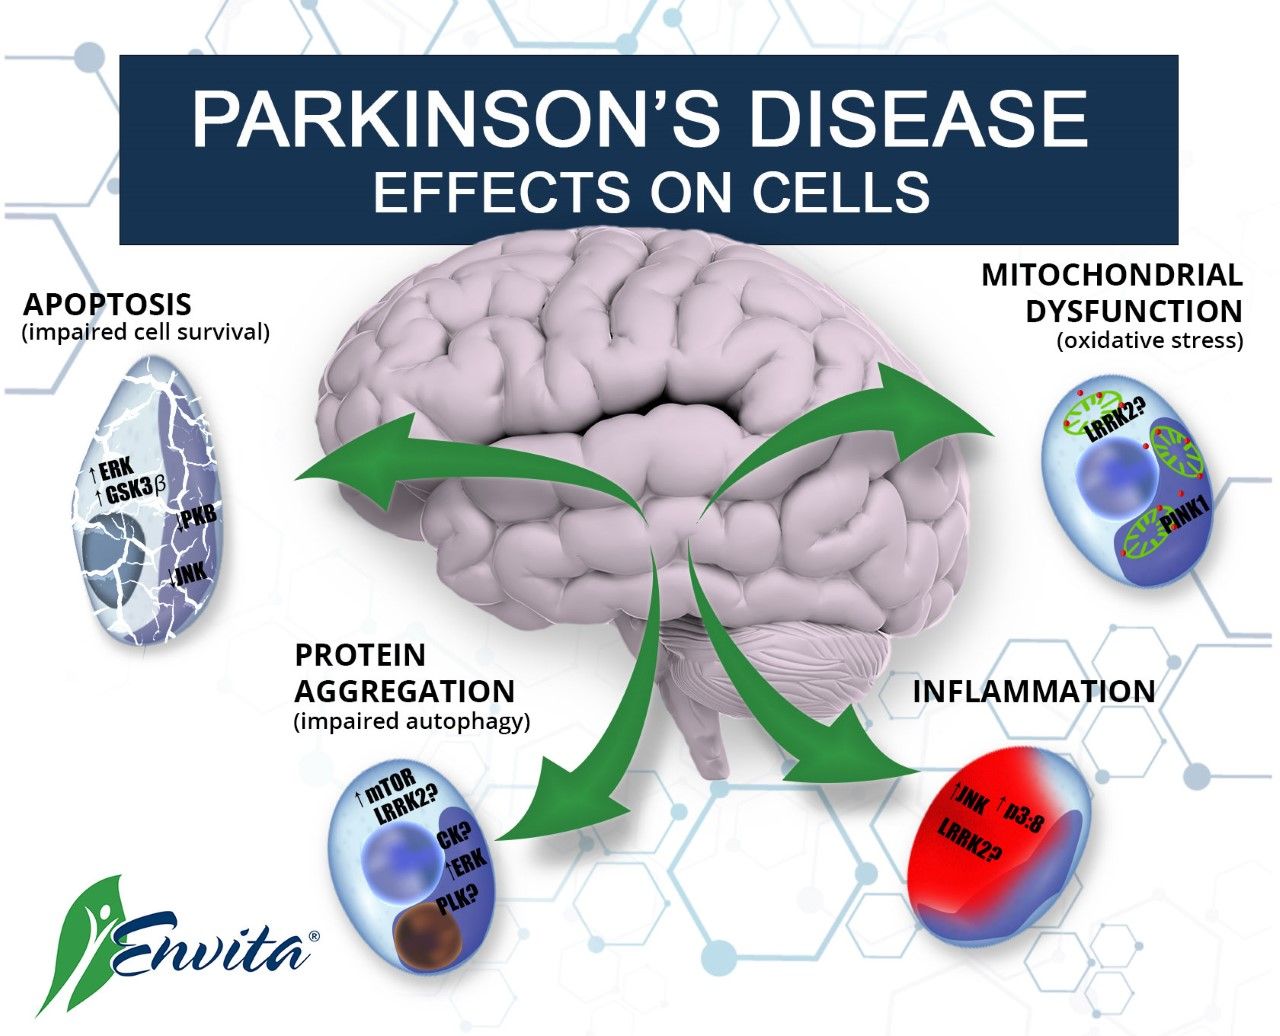 Parkinsons disease was first described in 1817 by James ...